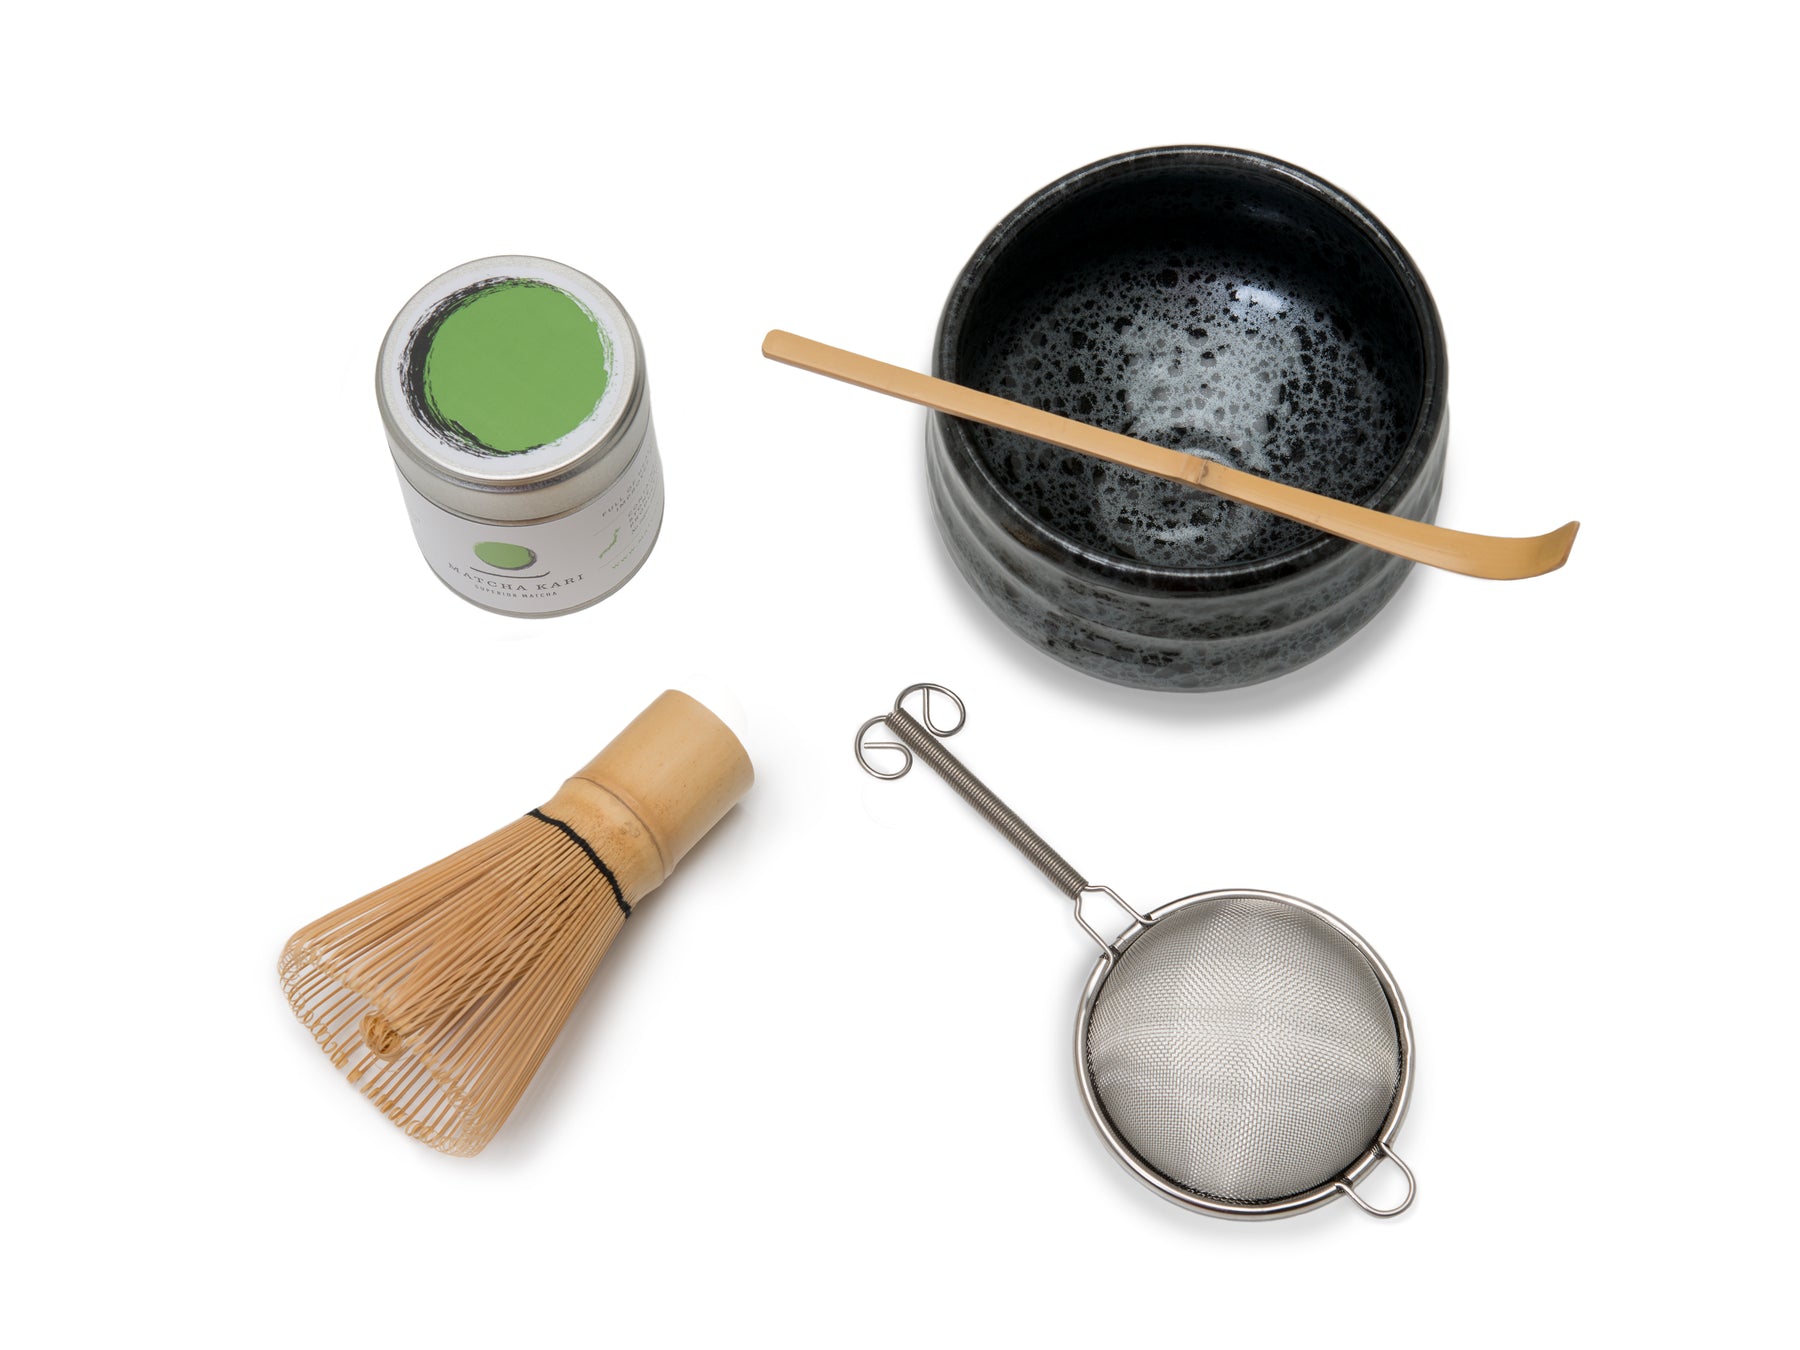  7Pcs Japanese Matcha Tea Set, Matcha Kit with Matcha Bowl (with  Pouring Spout), Matcha Whisk, Whisk Holder，Powder Caddy, Strainer - Elegant Matcha  Set for Gifting and Personal Use, Gift Box Packaging 